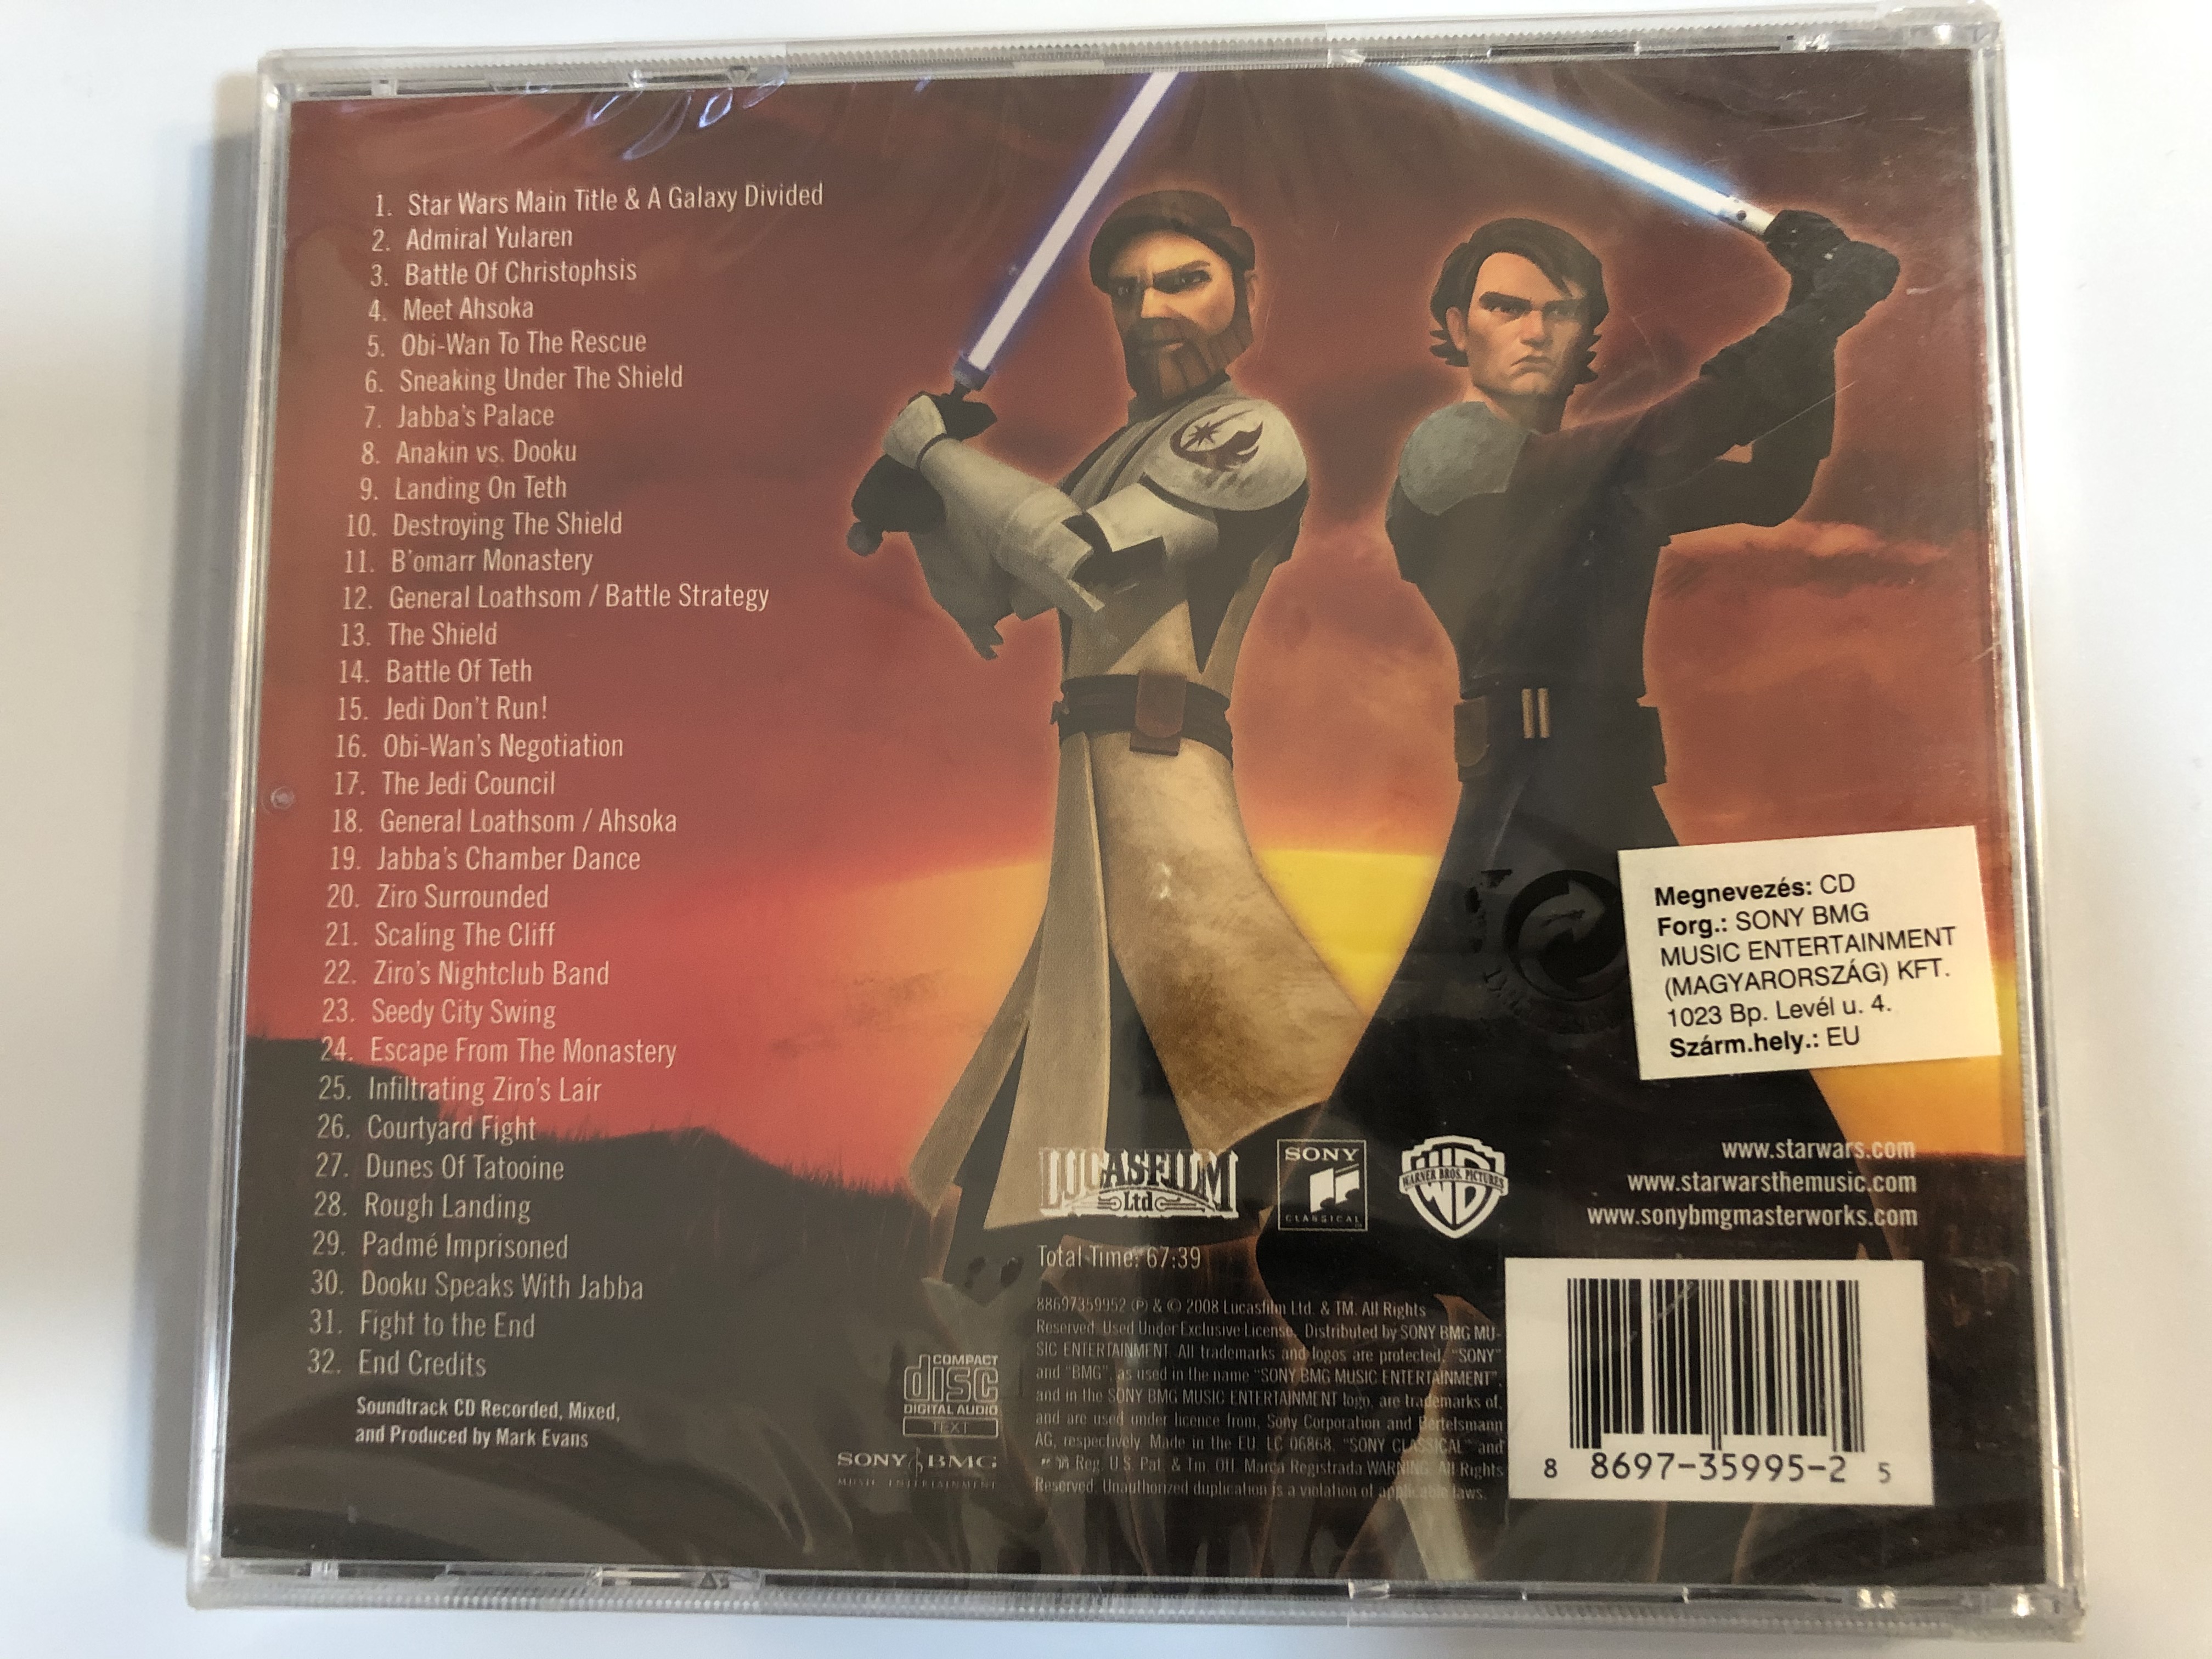 star-wars-the-clone-wars-original-motion-picture-soundtrack-music-composed-and-conducted-by-kevin-kiner-original-star-wars-themes-and-score-by-john-williams-sony-classical-audio-cd-2008.jpg